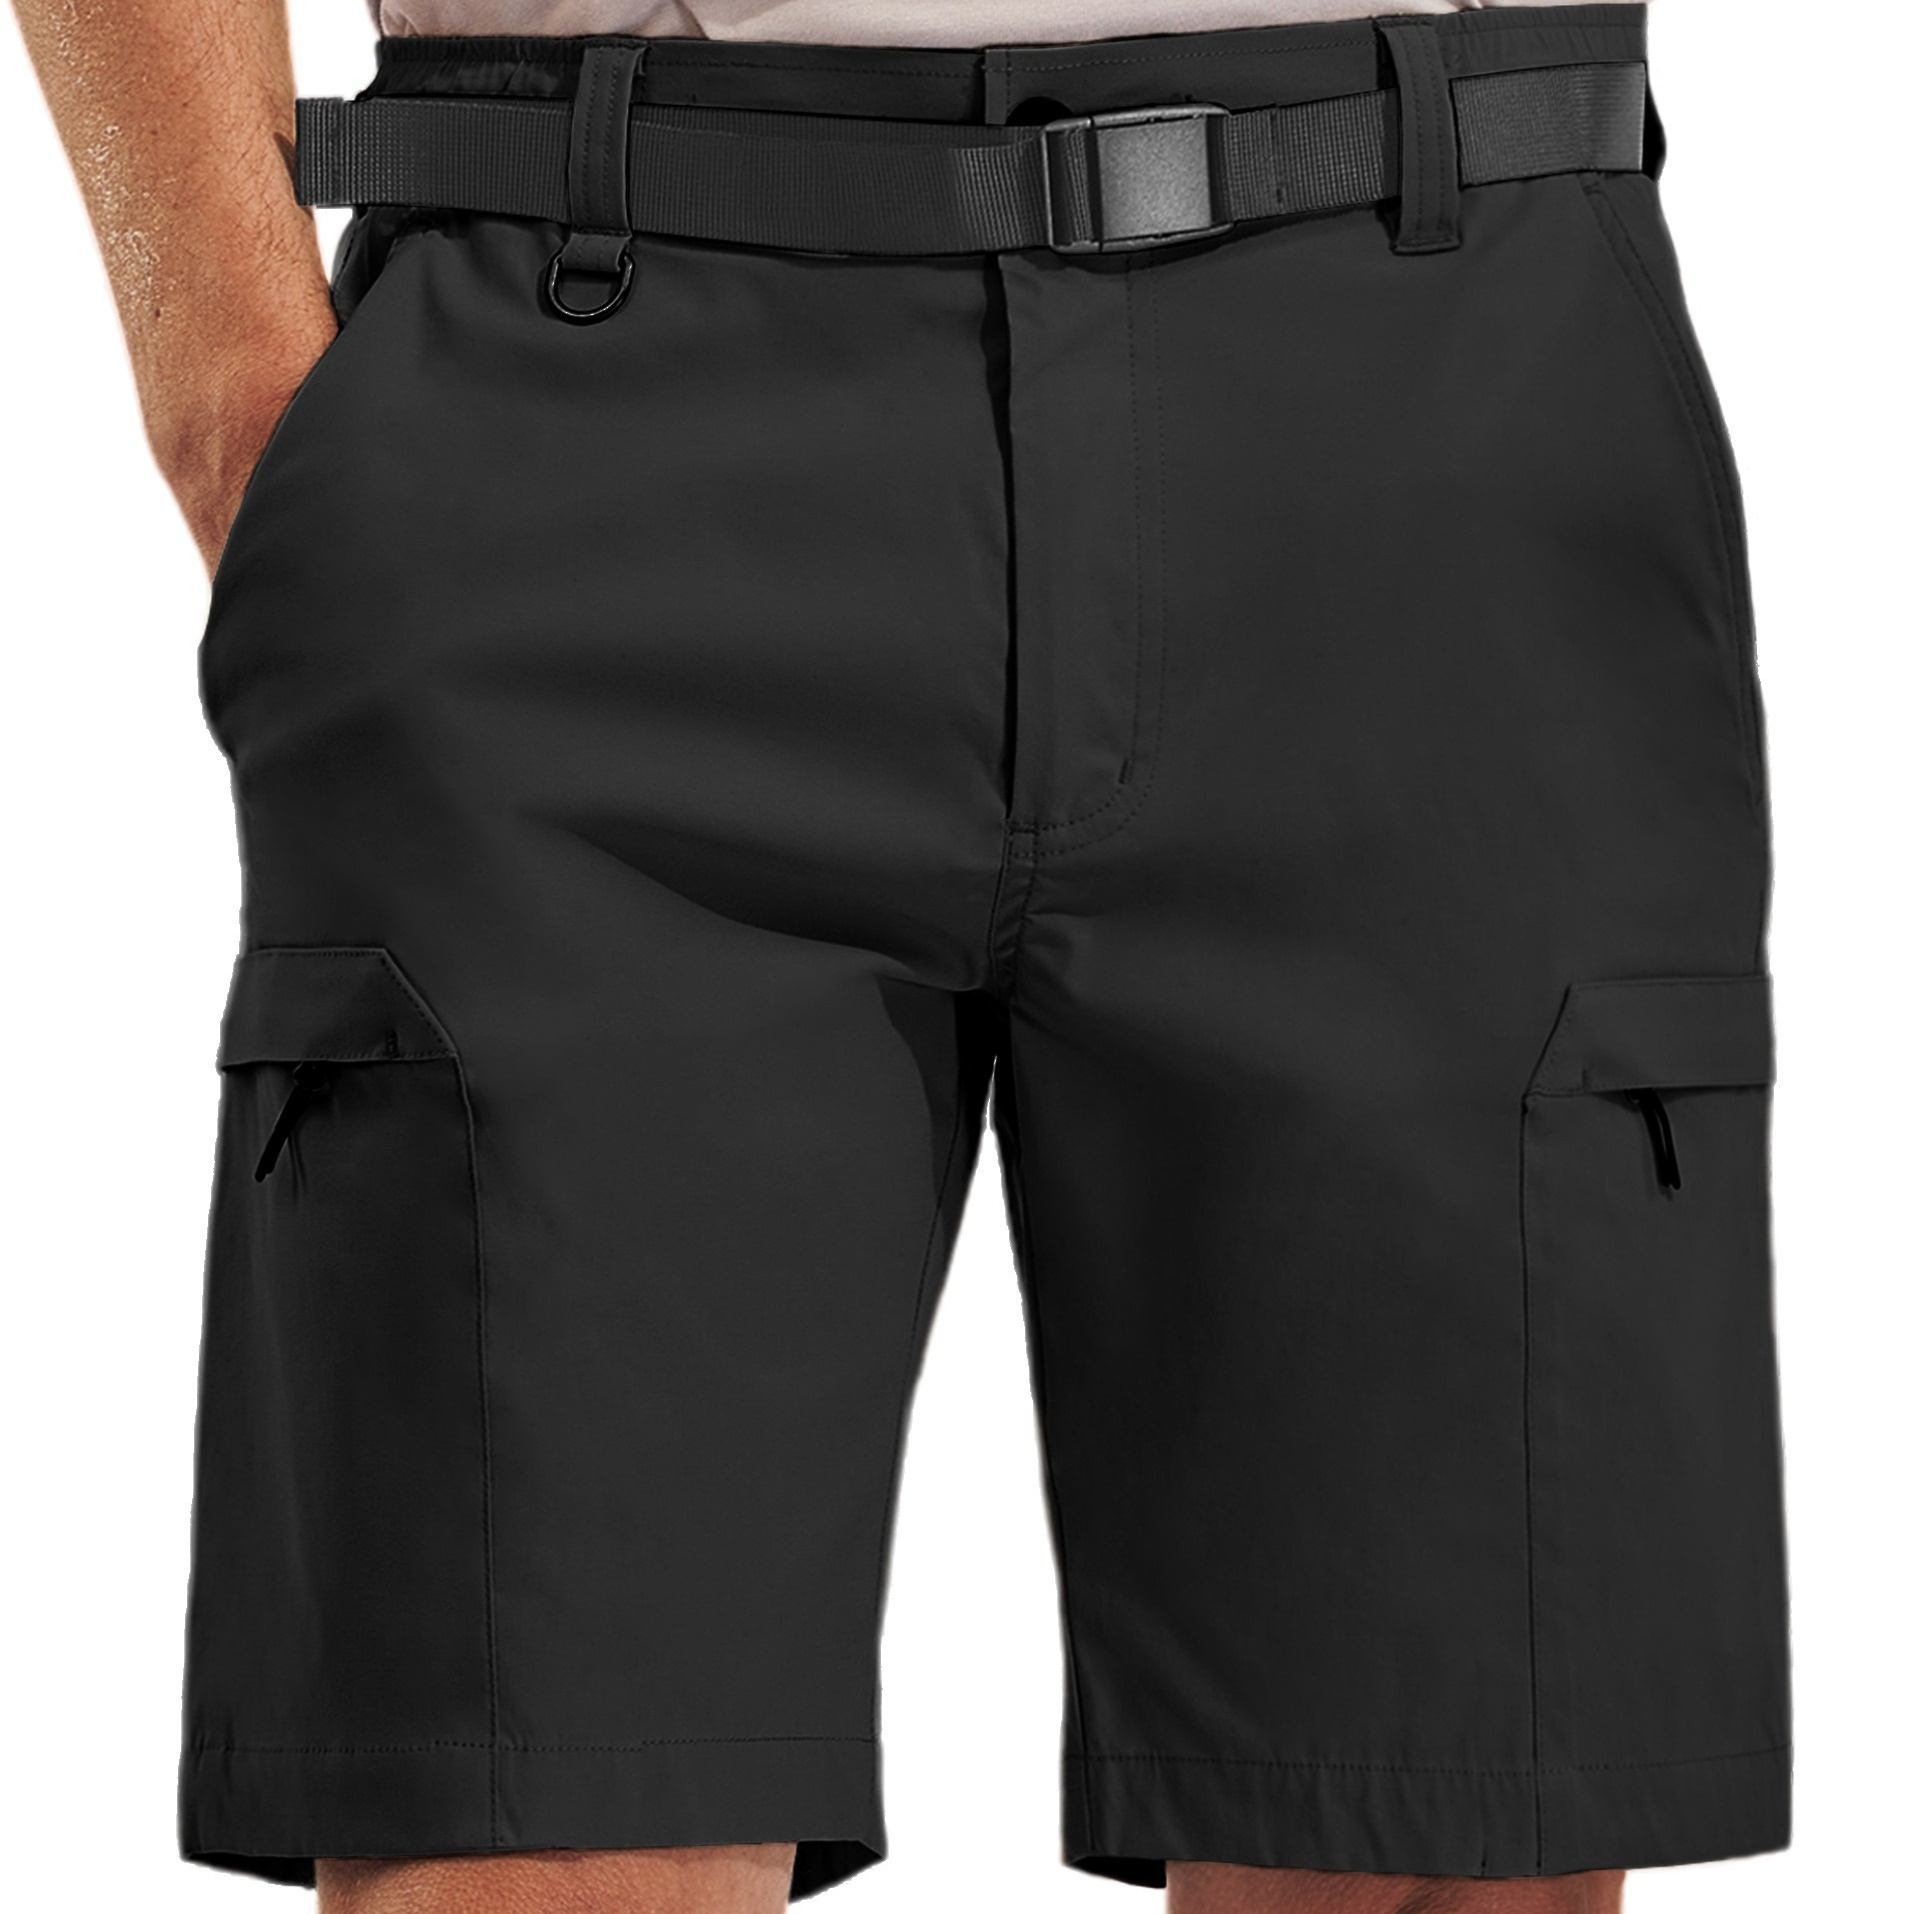 

Men's Outdoor Casual Shorts Expandable Waist Lightweight Water Resistant Quick Dry Fishing Hiking Shorts With Belt